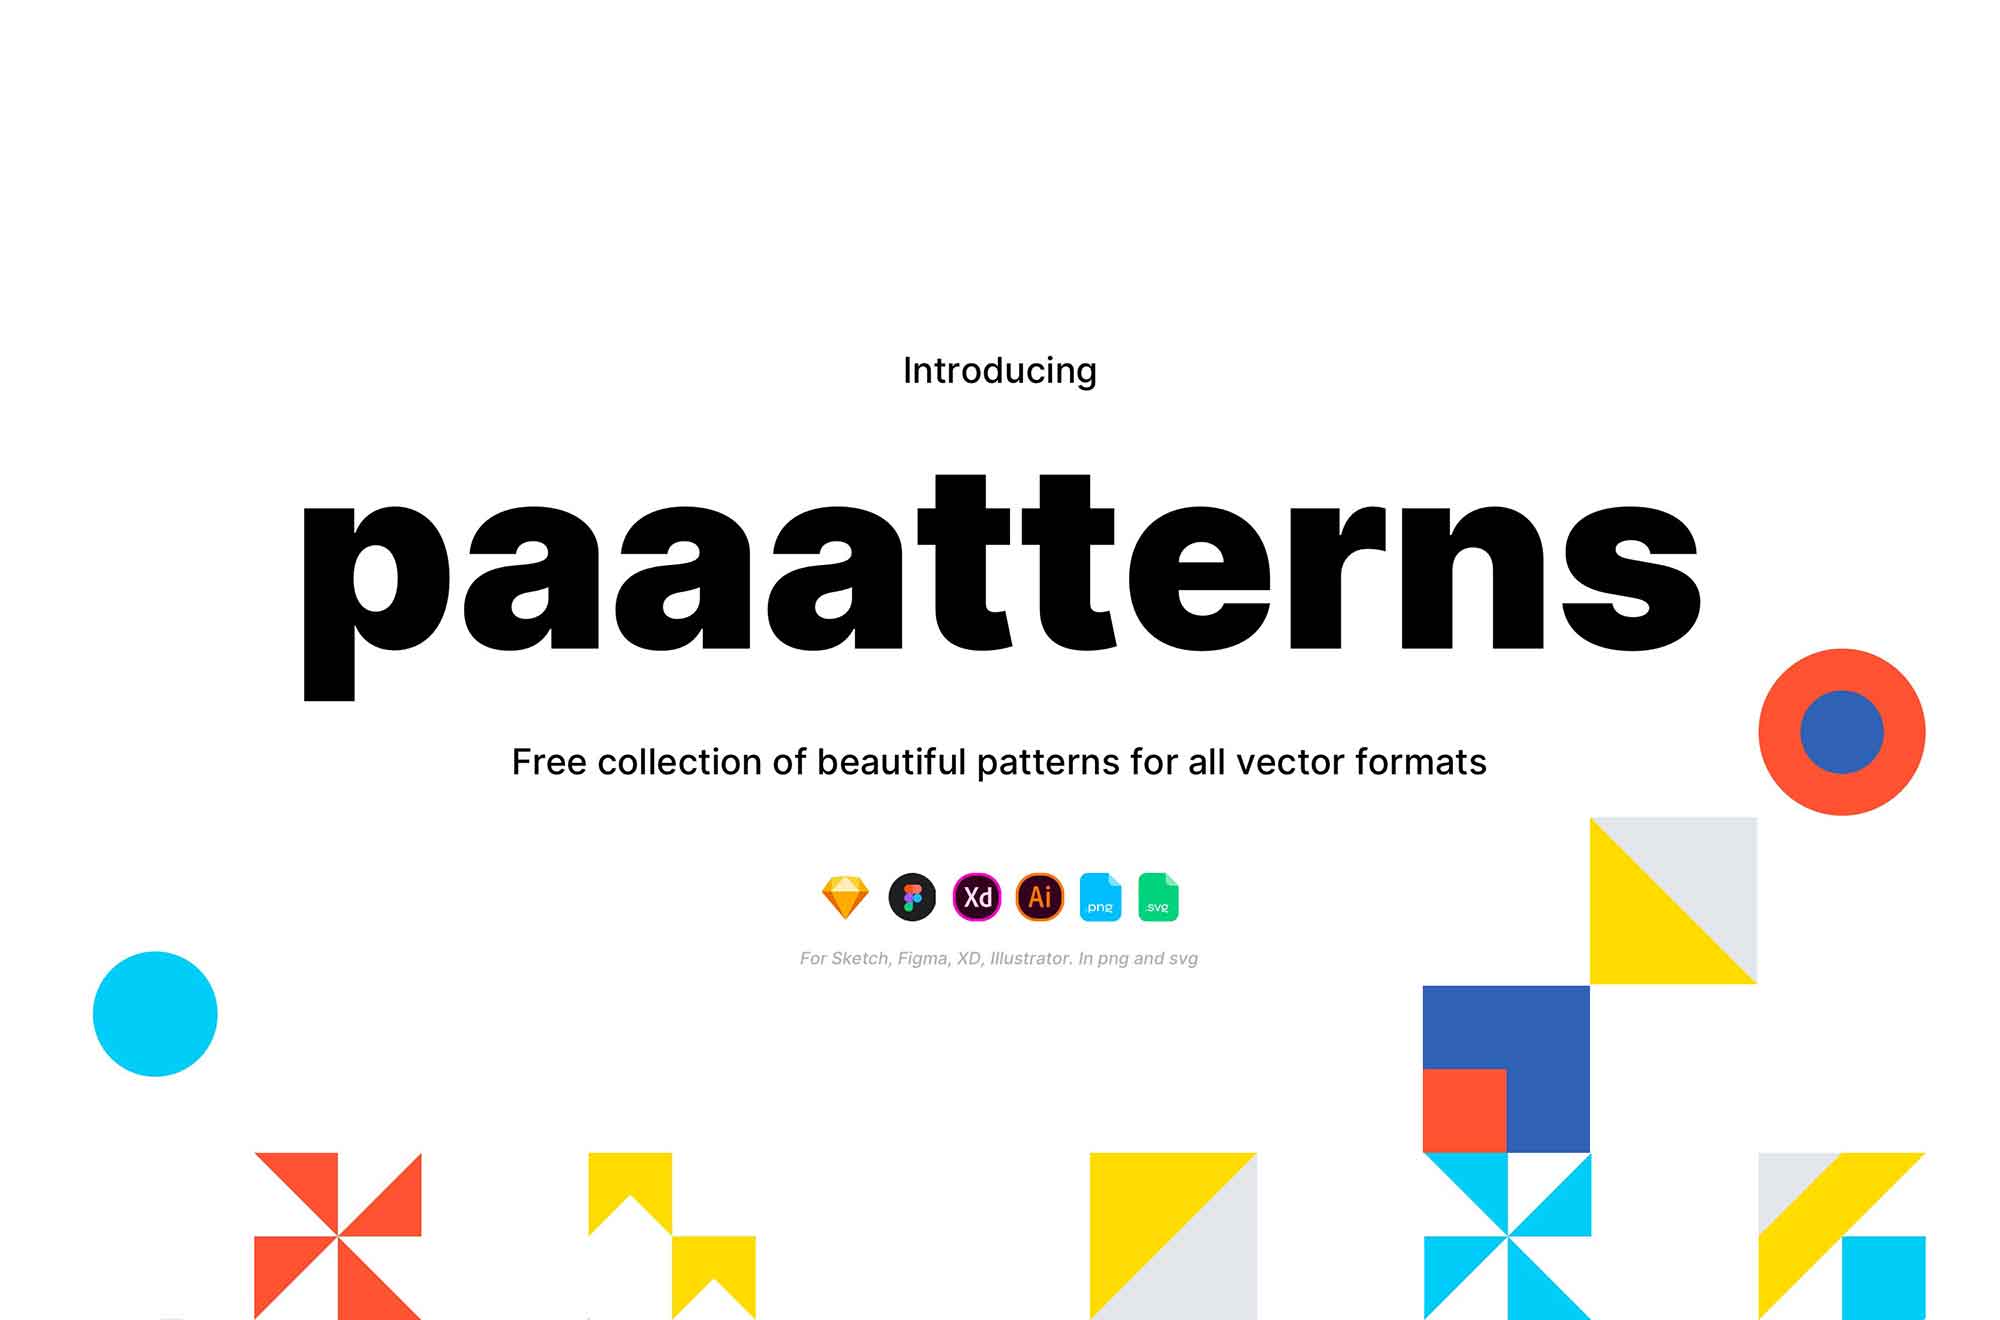 Collection of Vector Format Patterns